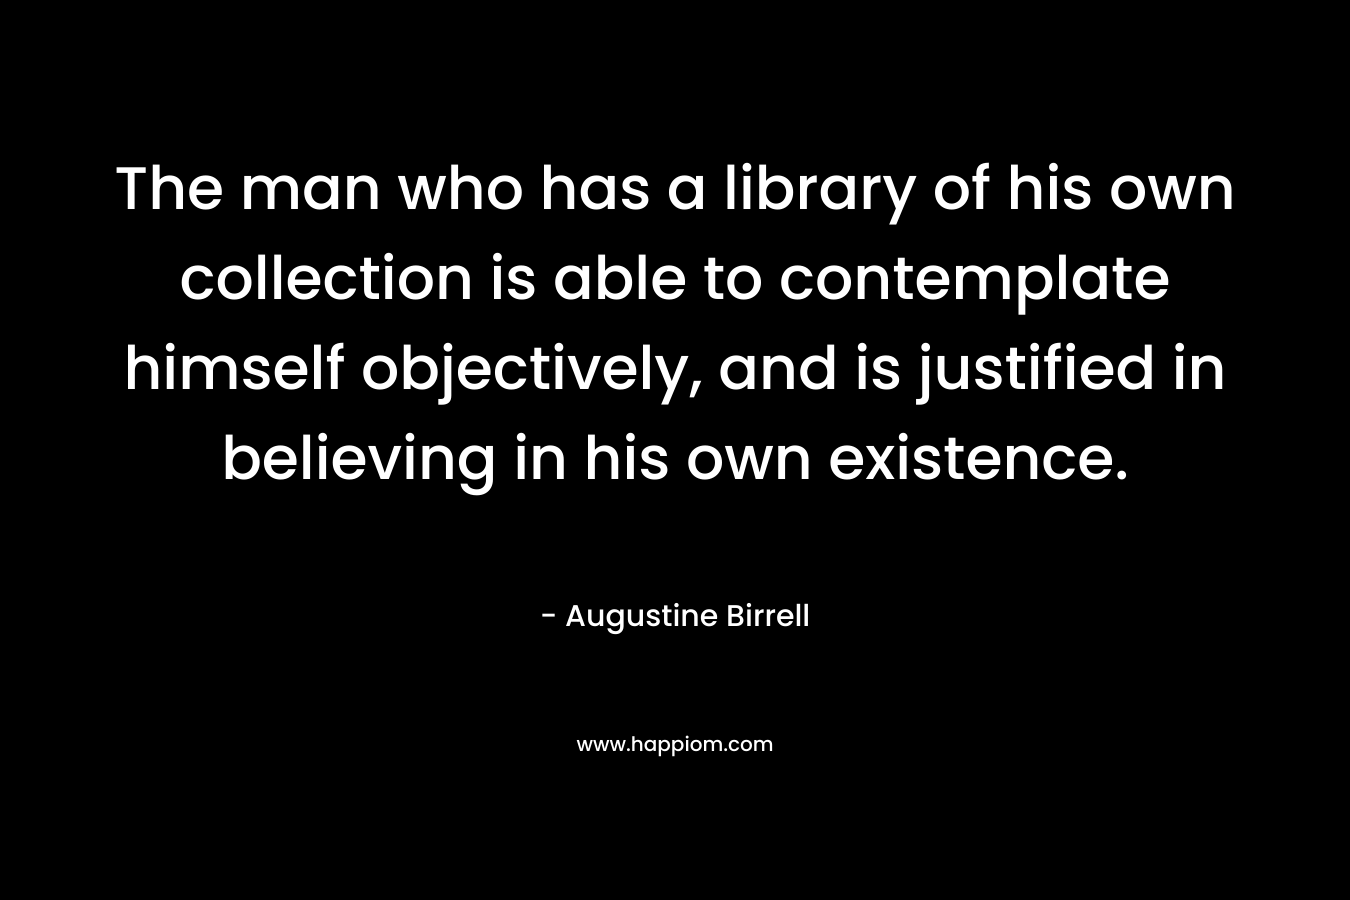 The man who has a library of his own collection is able to contemplate himself objectively, and is justified in believing in his own existence. – Augustine Birrell